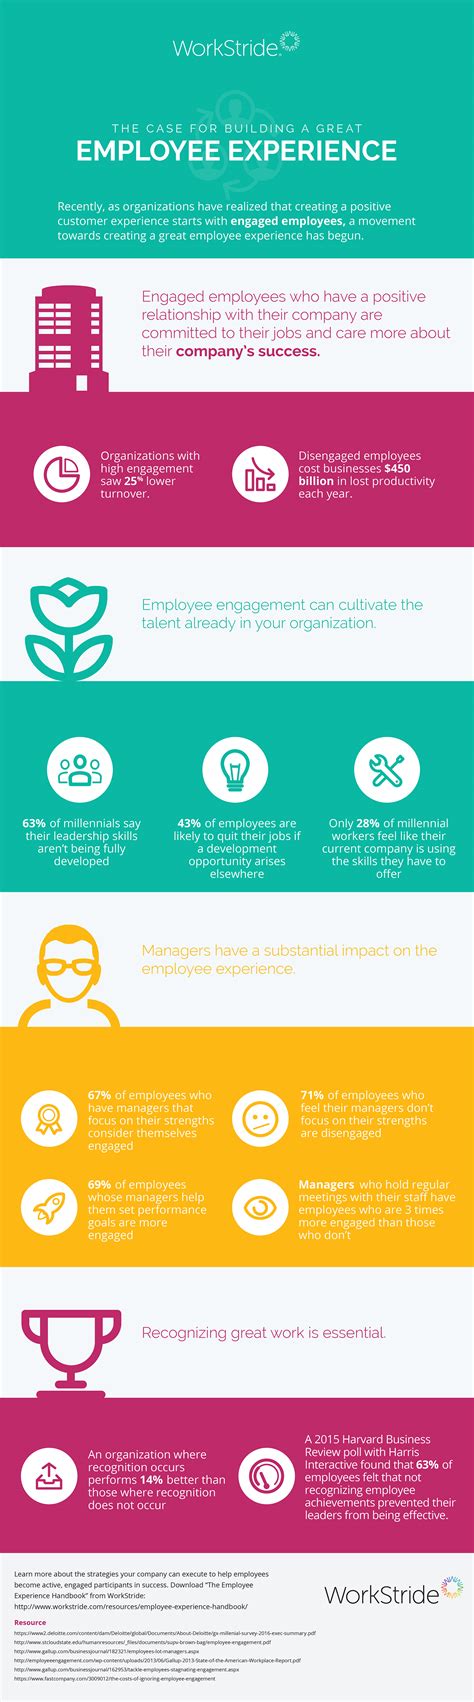 The Case For Building A Great Employee Experience Infographic